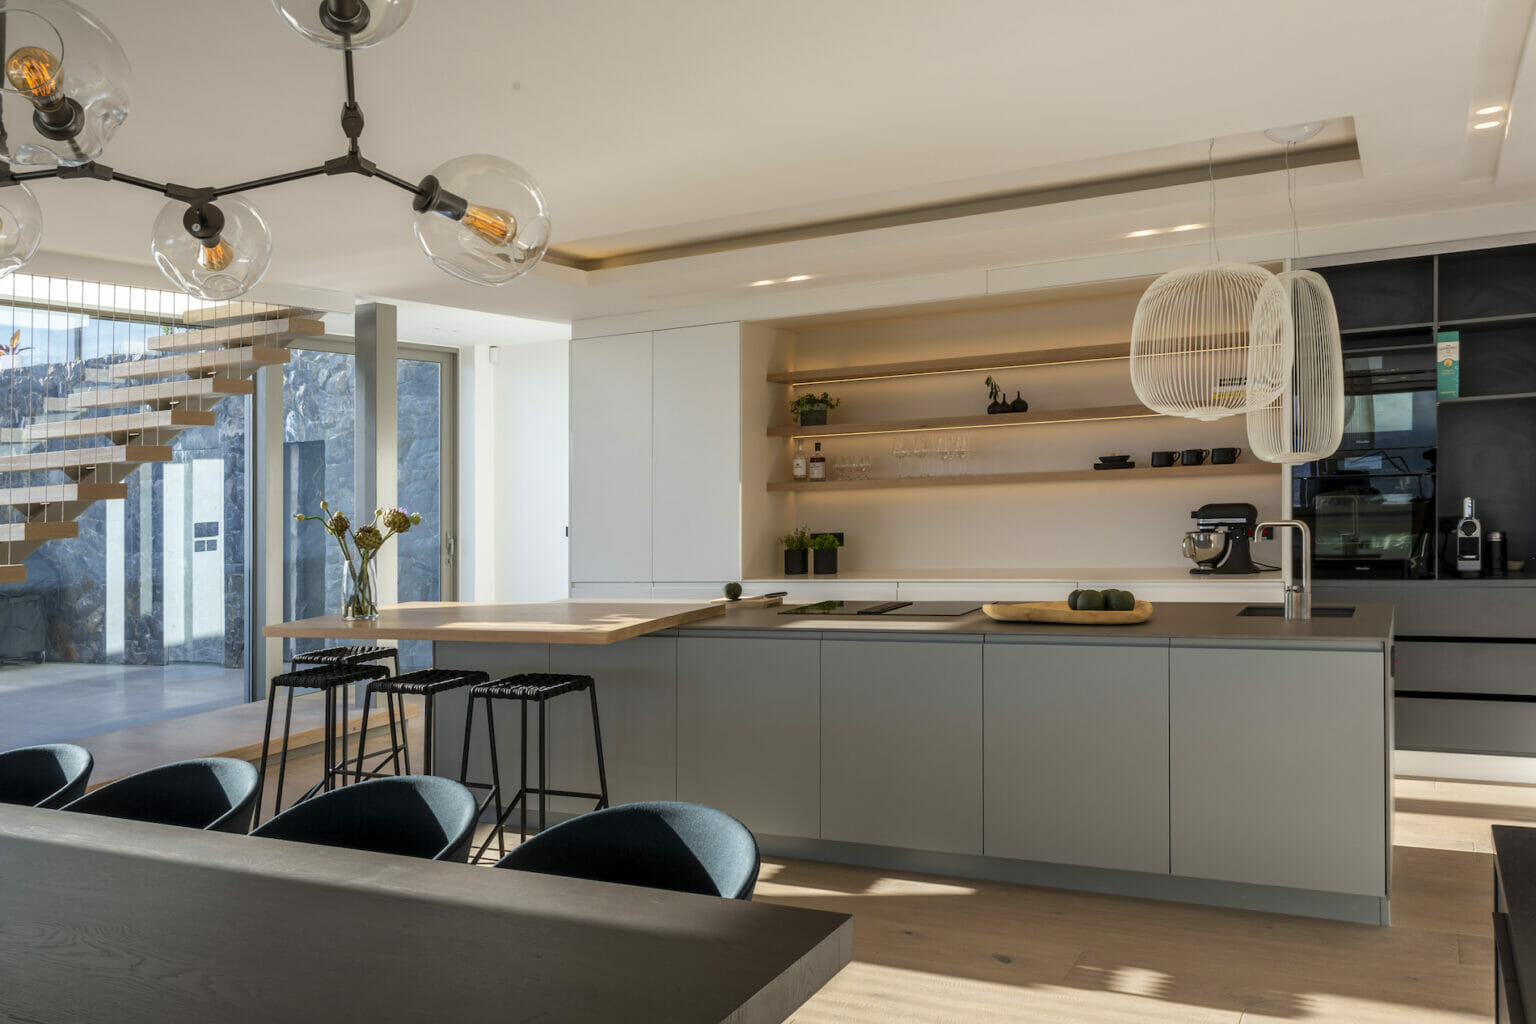 Neutral and minimalist kitchen design with timber shelving and cantilevered breakfast bar